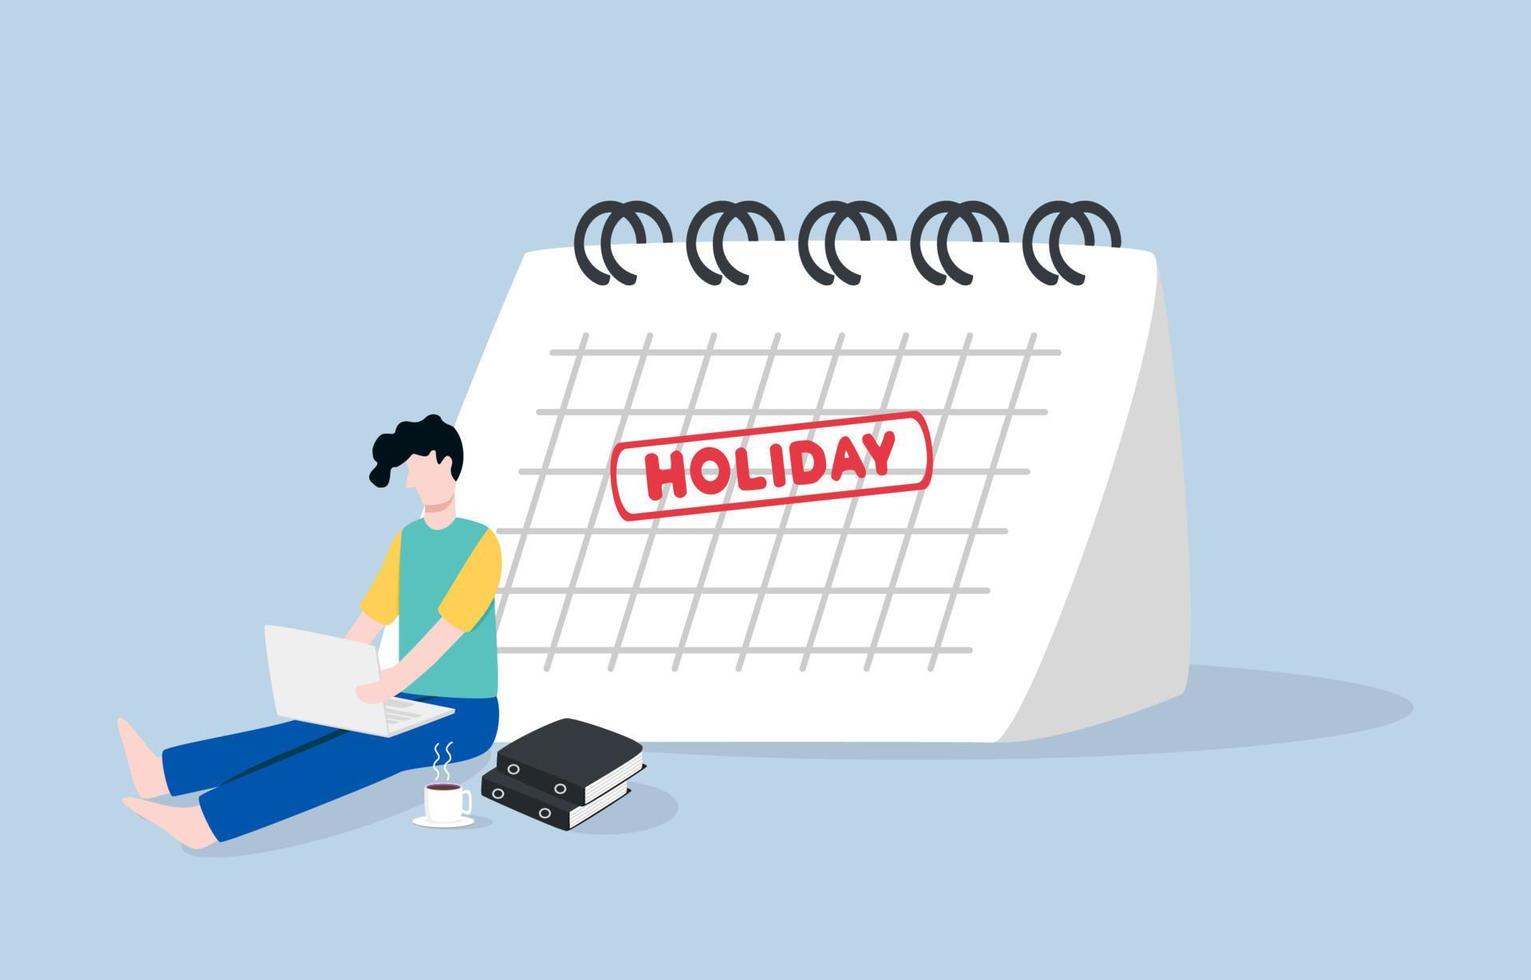 Workaholic, work overtime, hard working business, or busy employee concept. Man spending his holiday for work. vector